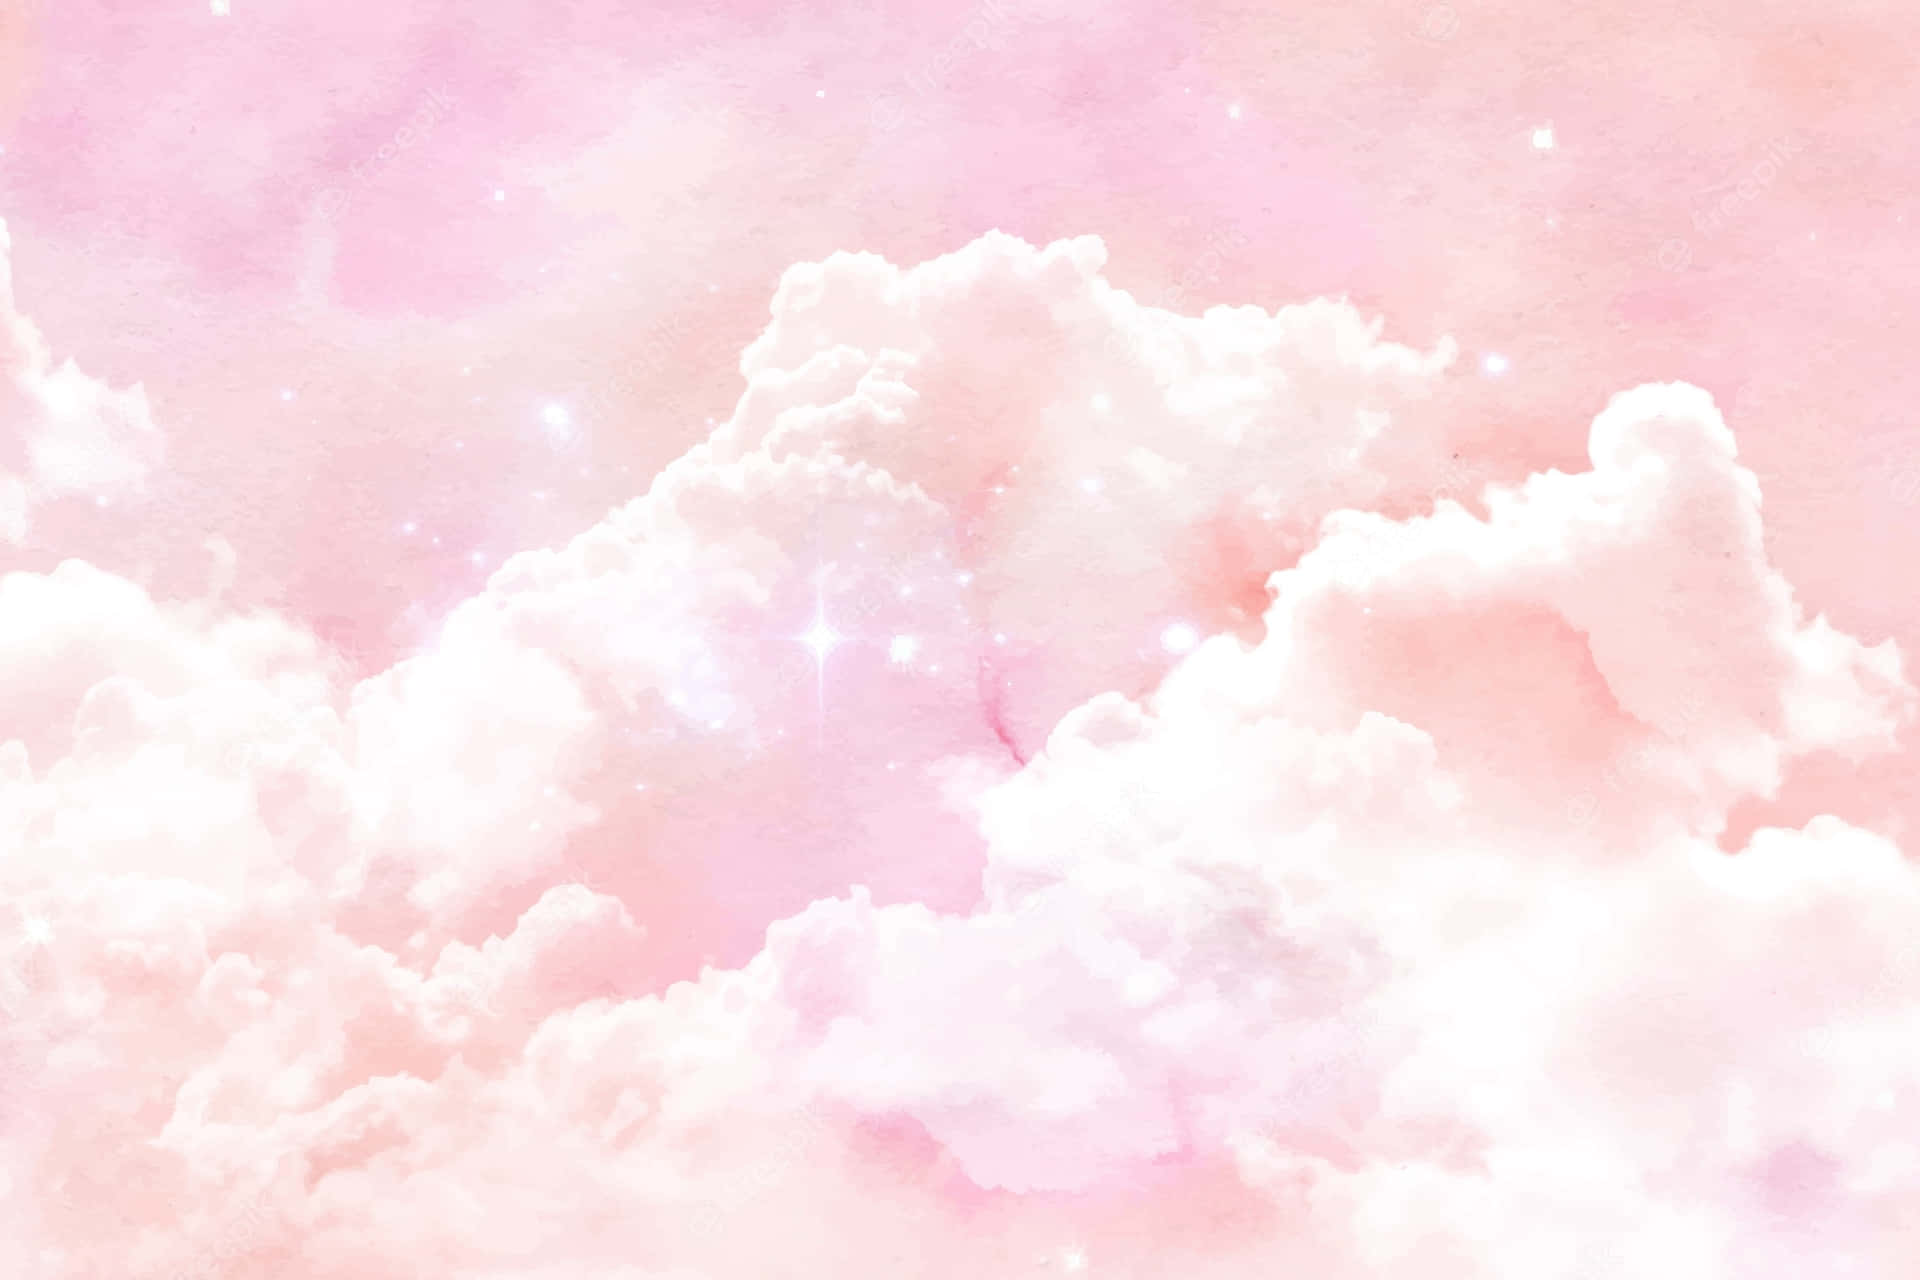 Soft and powdery pink clouds in the sky for a calming and peaceful feel